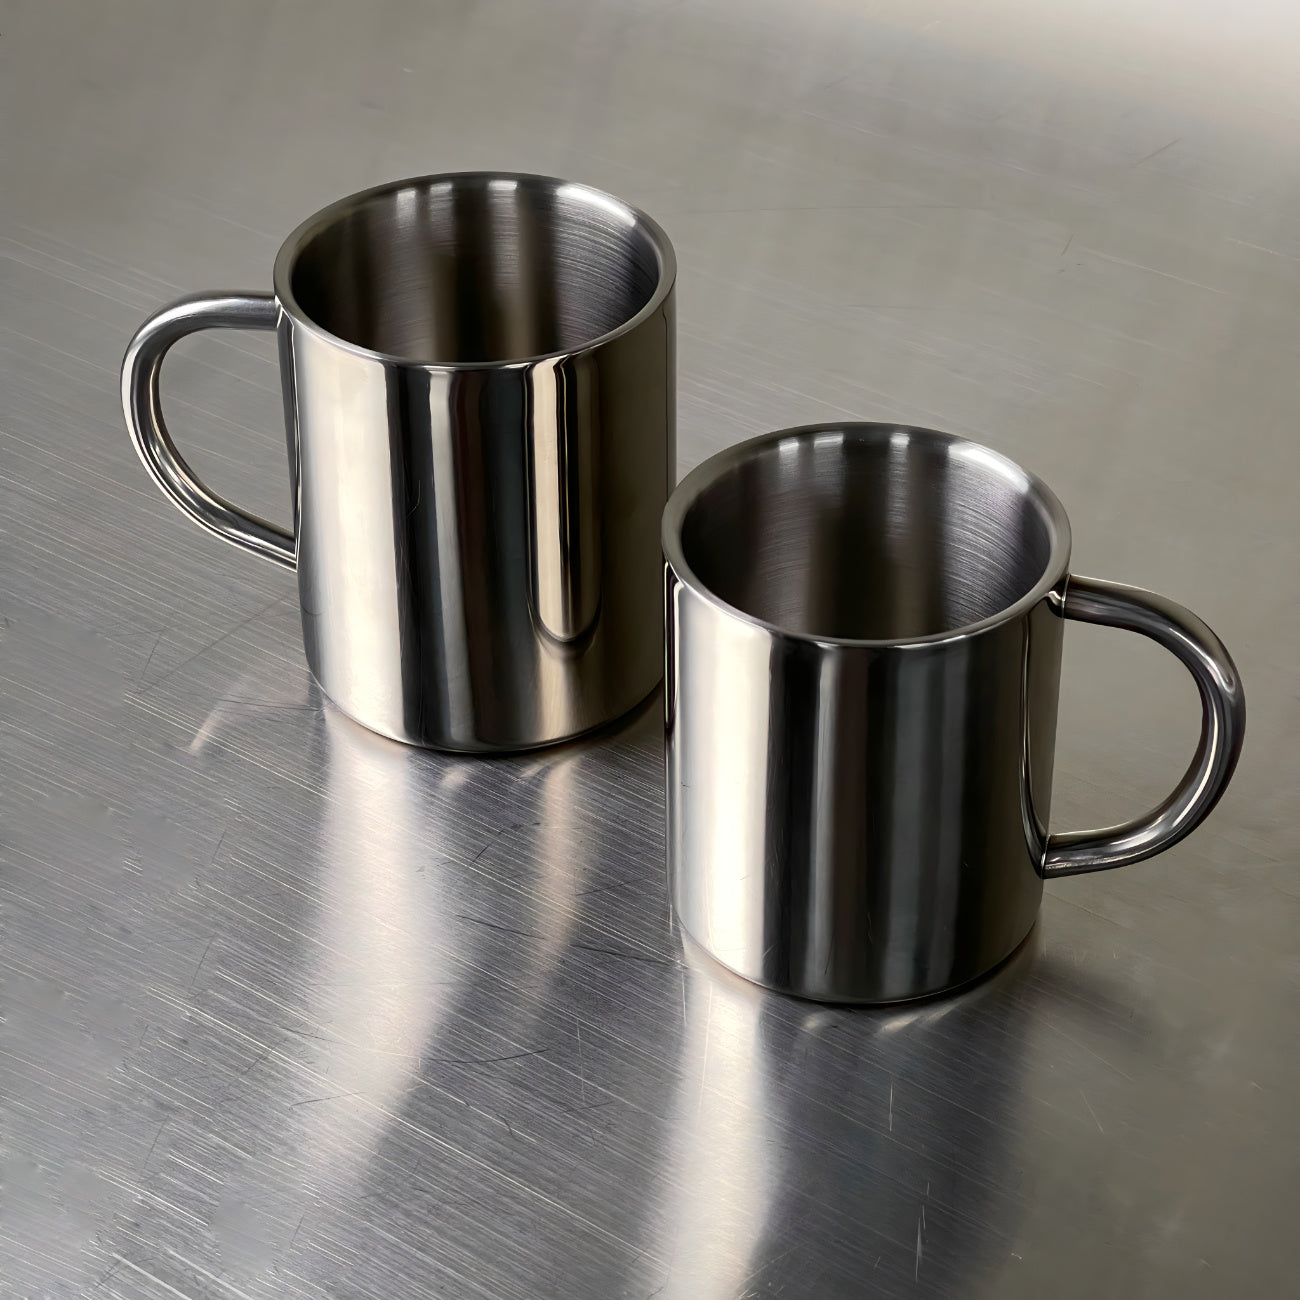 Double-Layer Glossy Stainless Steel Cups - LoveÉcru LoveÉcru